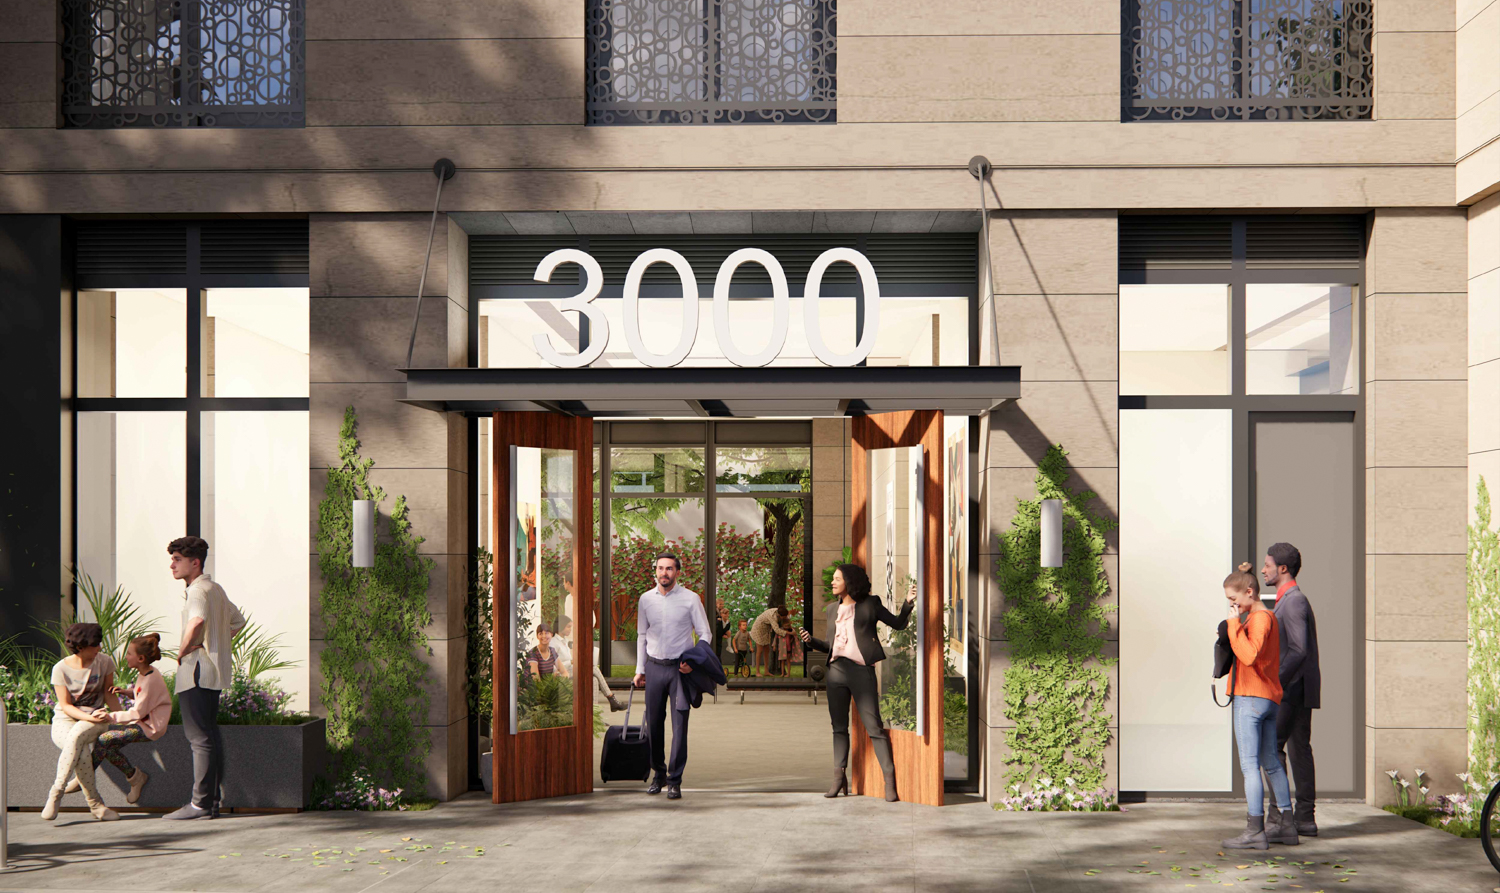 3000 Shattuck Avenue residential entry space, rendering by Trachtenberg Architects